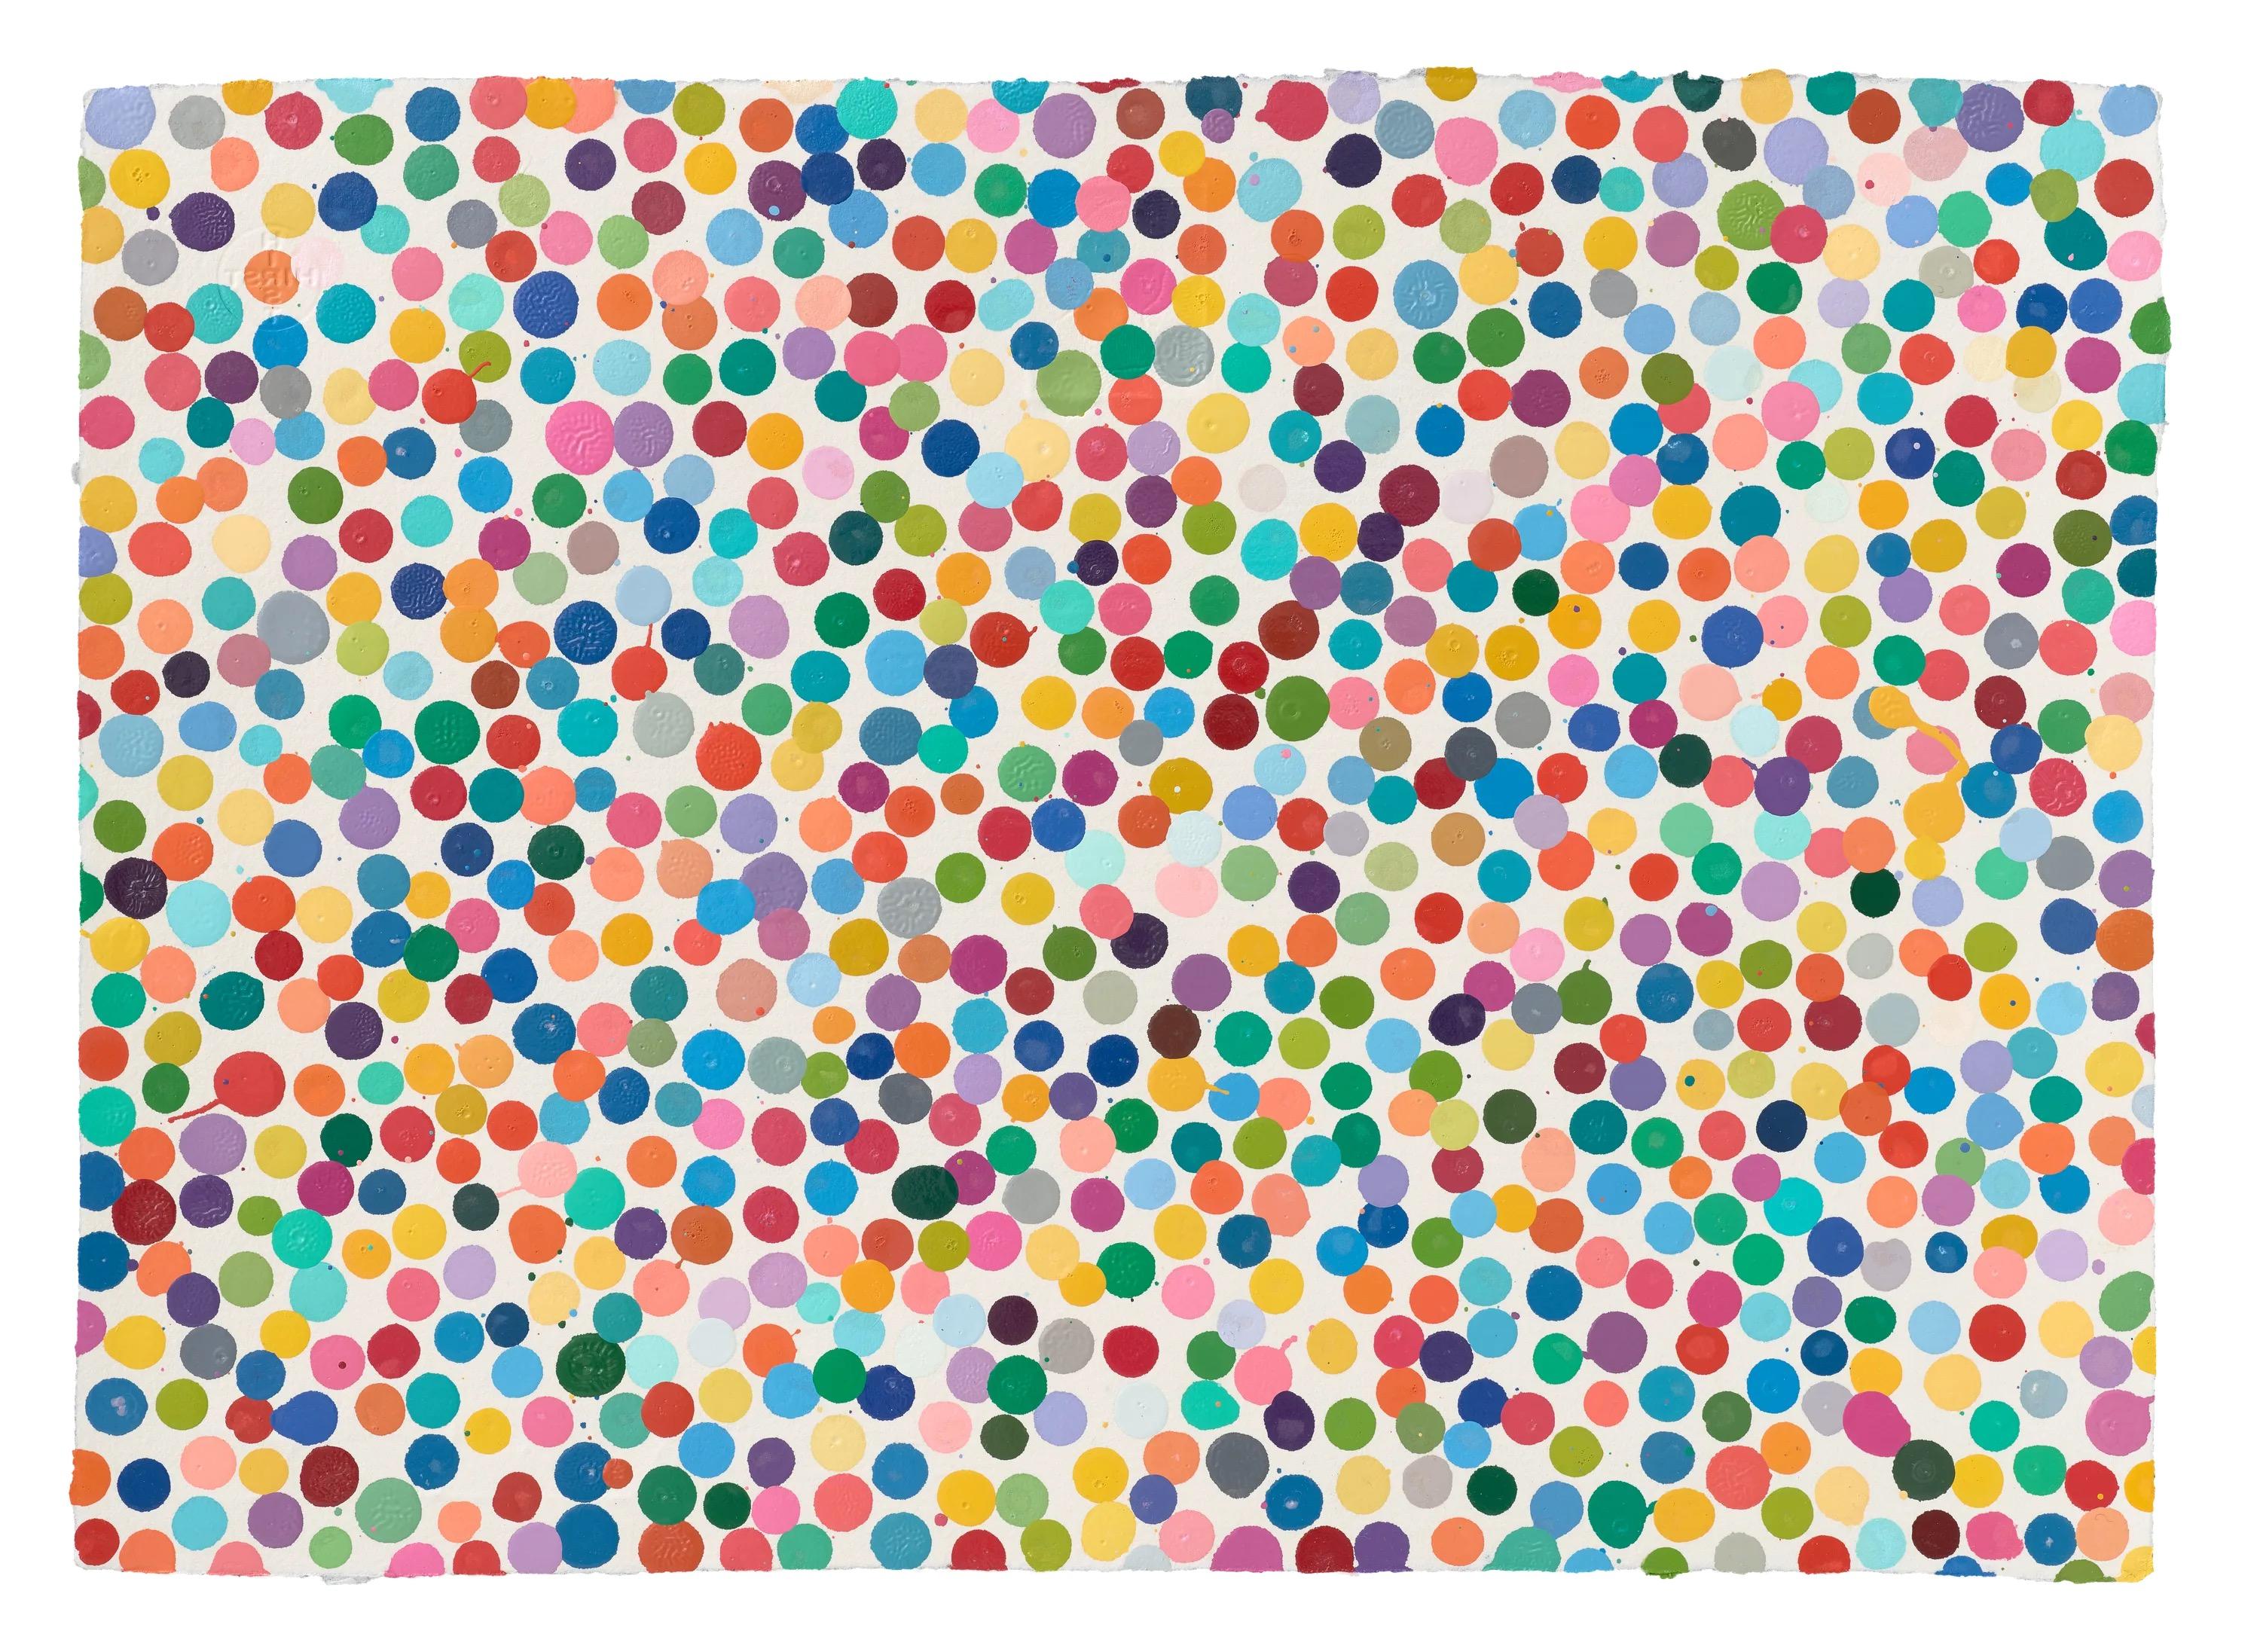 4548. Jealousy like a girl (The Currency) 2016-2021, Enamel paint  - Print by Damien Hirst